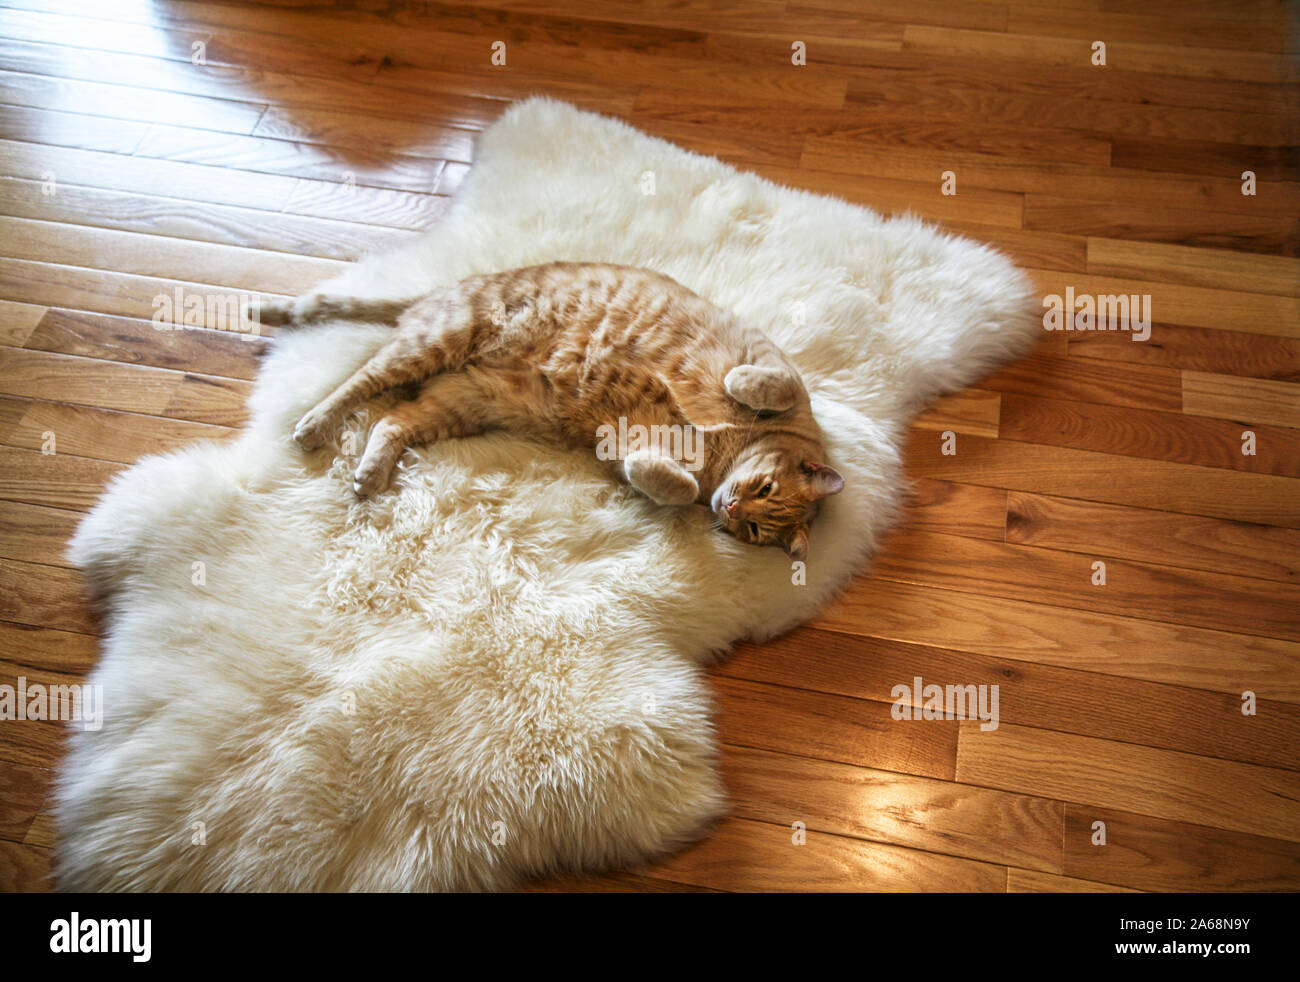 Orange ginger tabby cat on a sheepskin rug, humour, New Jersey, USA, cute kitten happy funny animals domestic cats lazy cute funny kittens animals Stock Photo